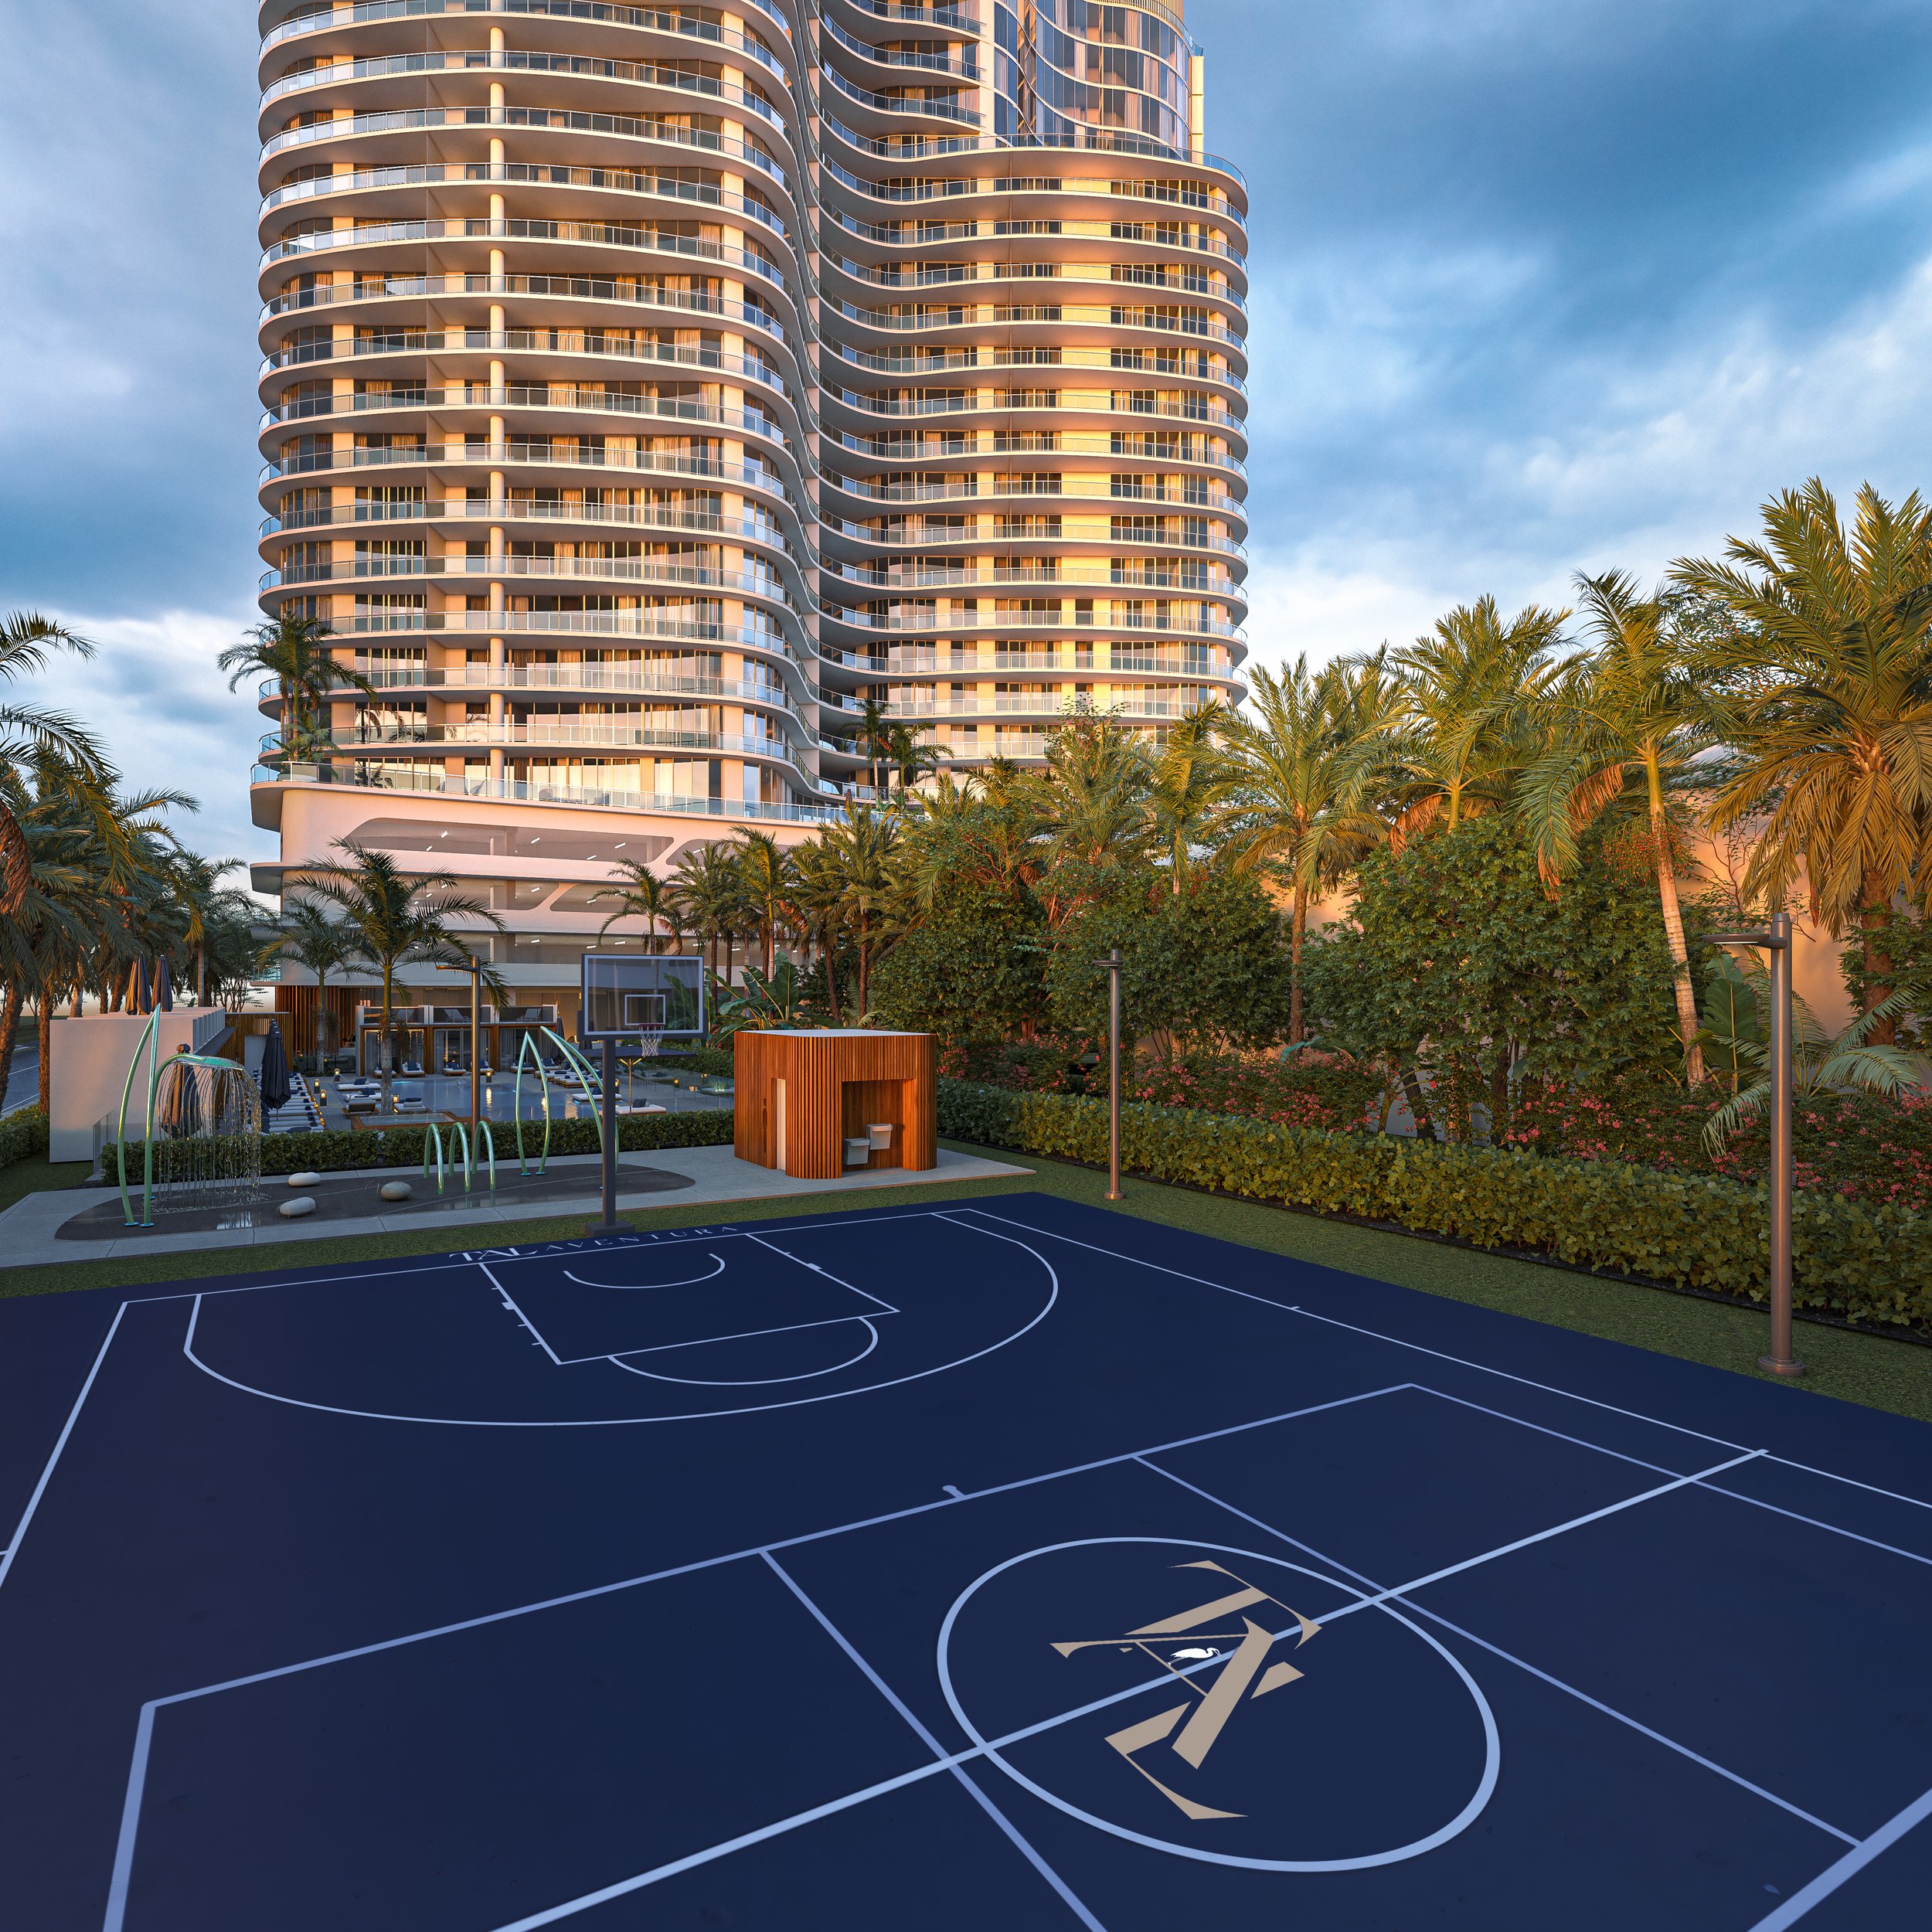 Tal Aventura Reveals Interior And Amenity Renderings Imagined By IDEA Architects and IDDI 29.jpg